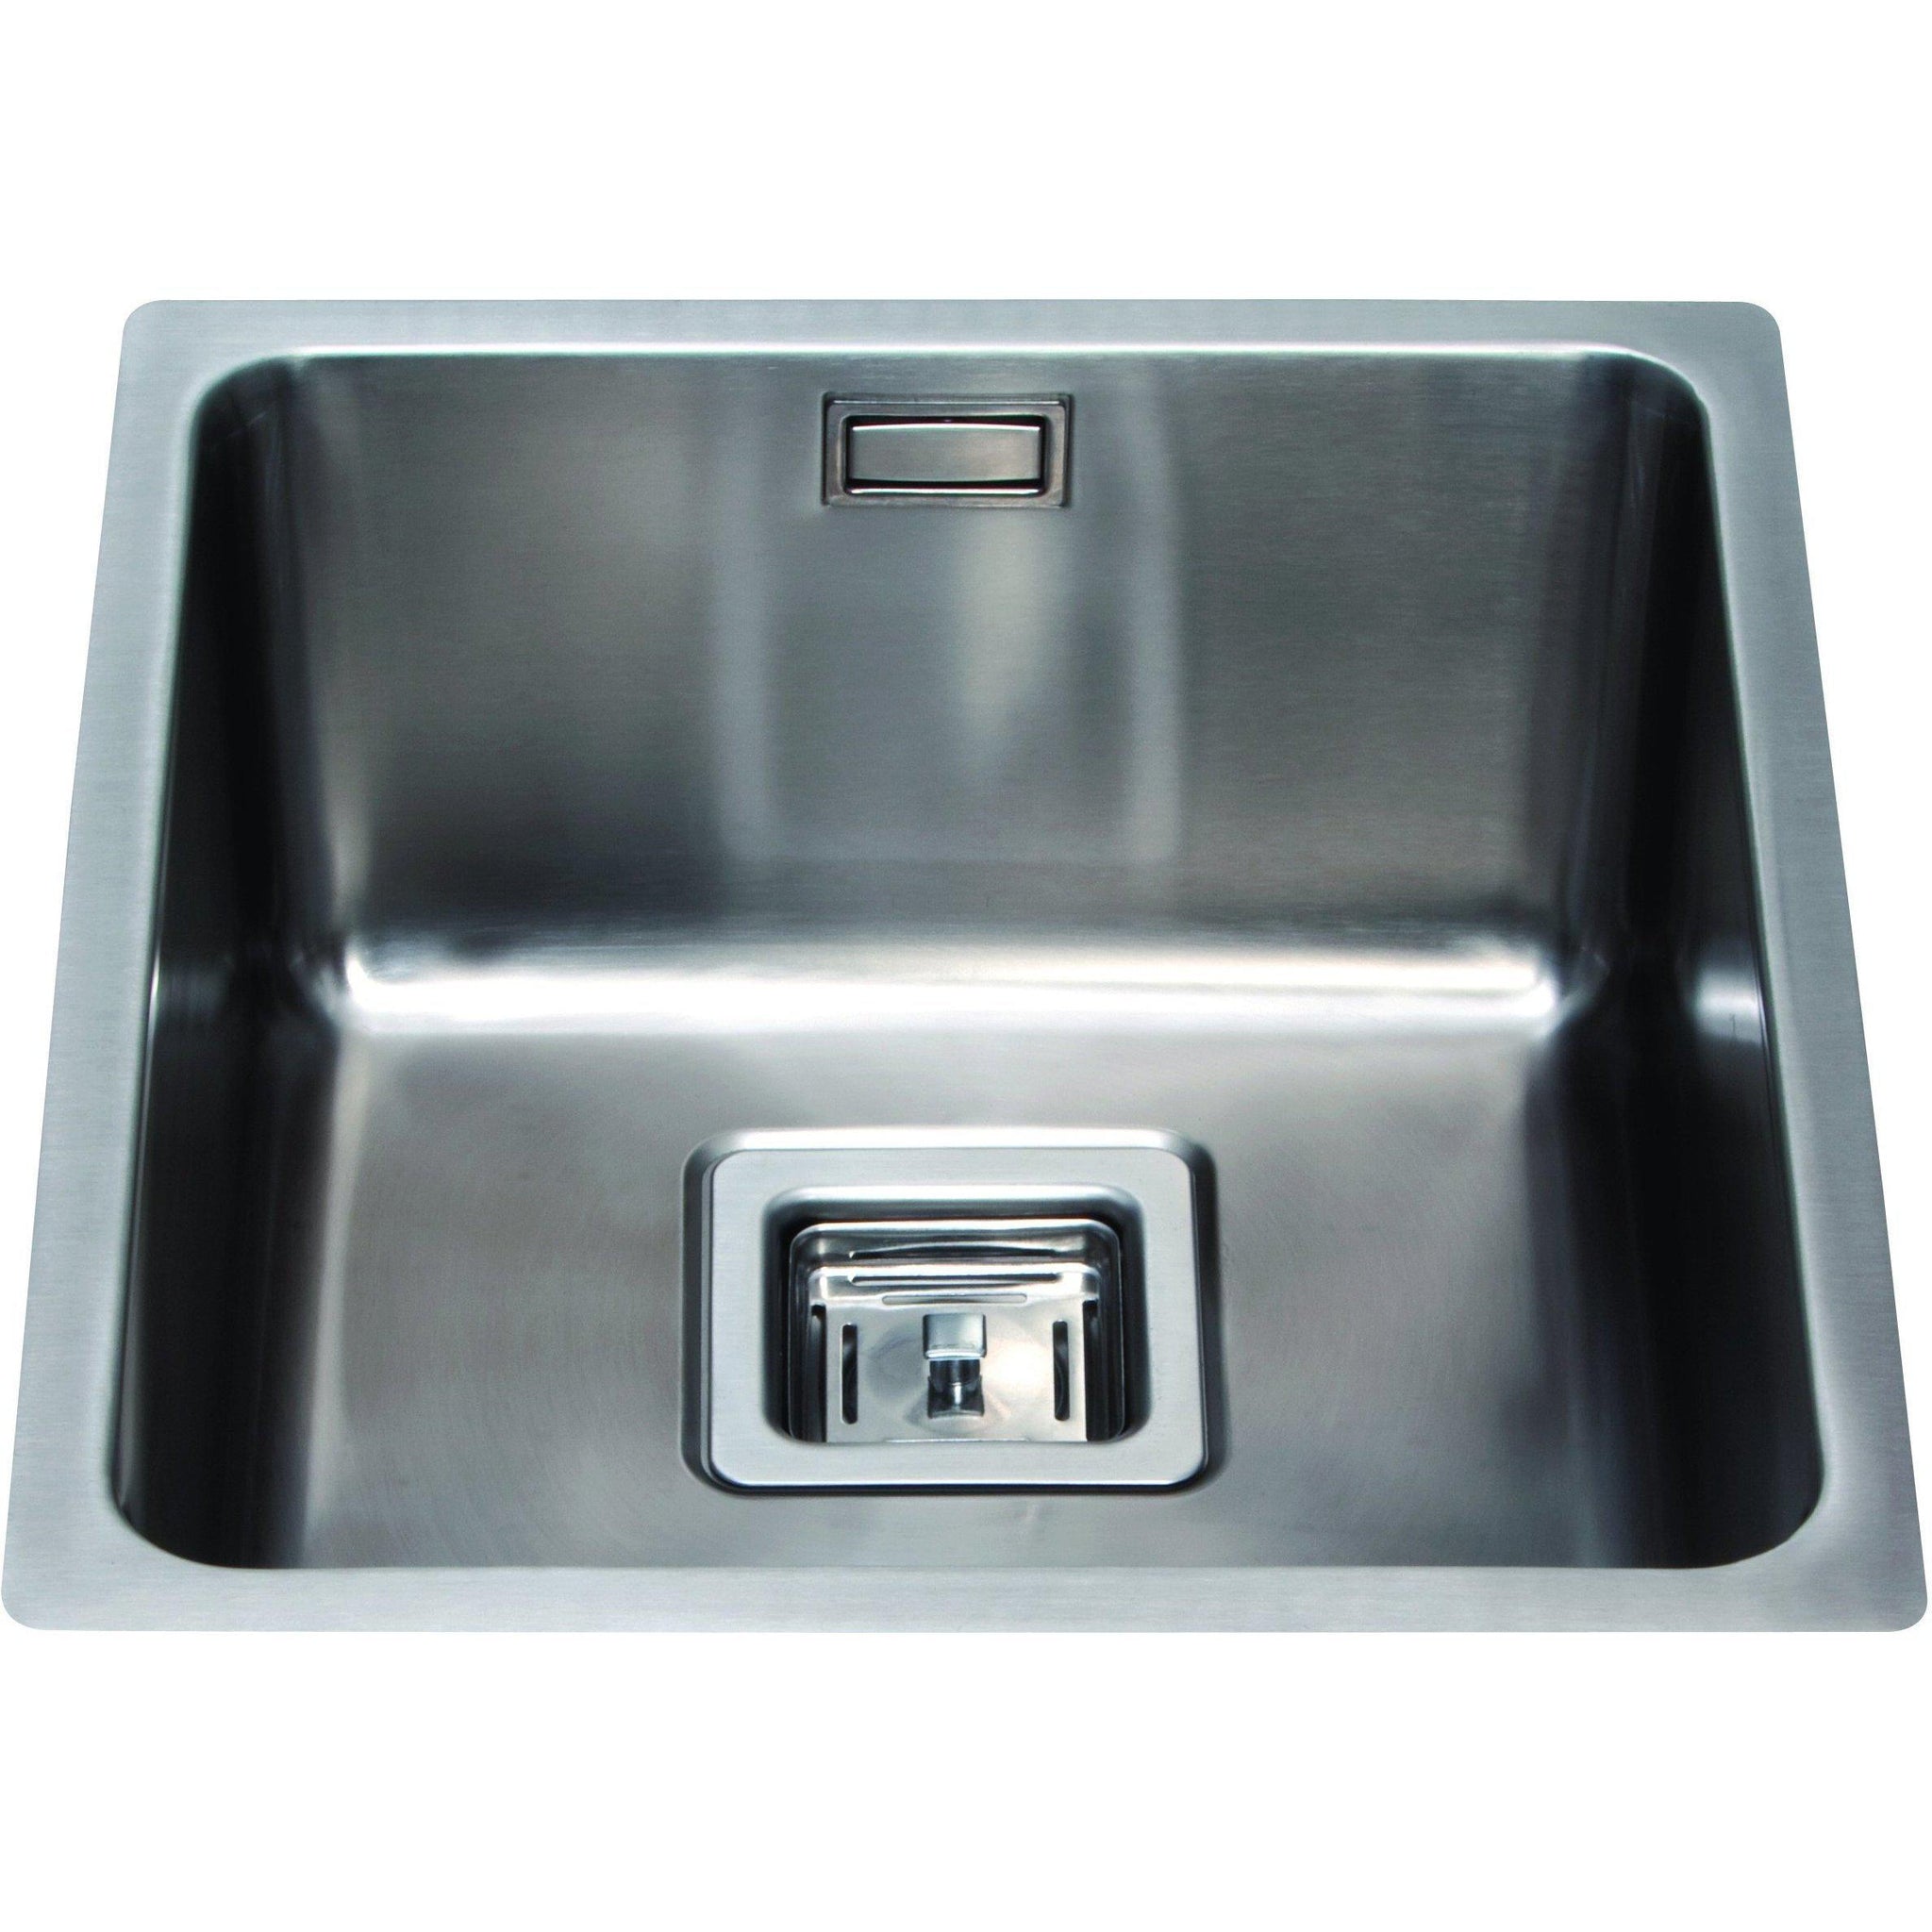 Cda Ksc23ss Undermount Square Single Bowl Sink Stainless Steel